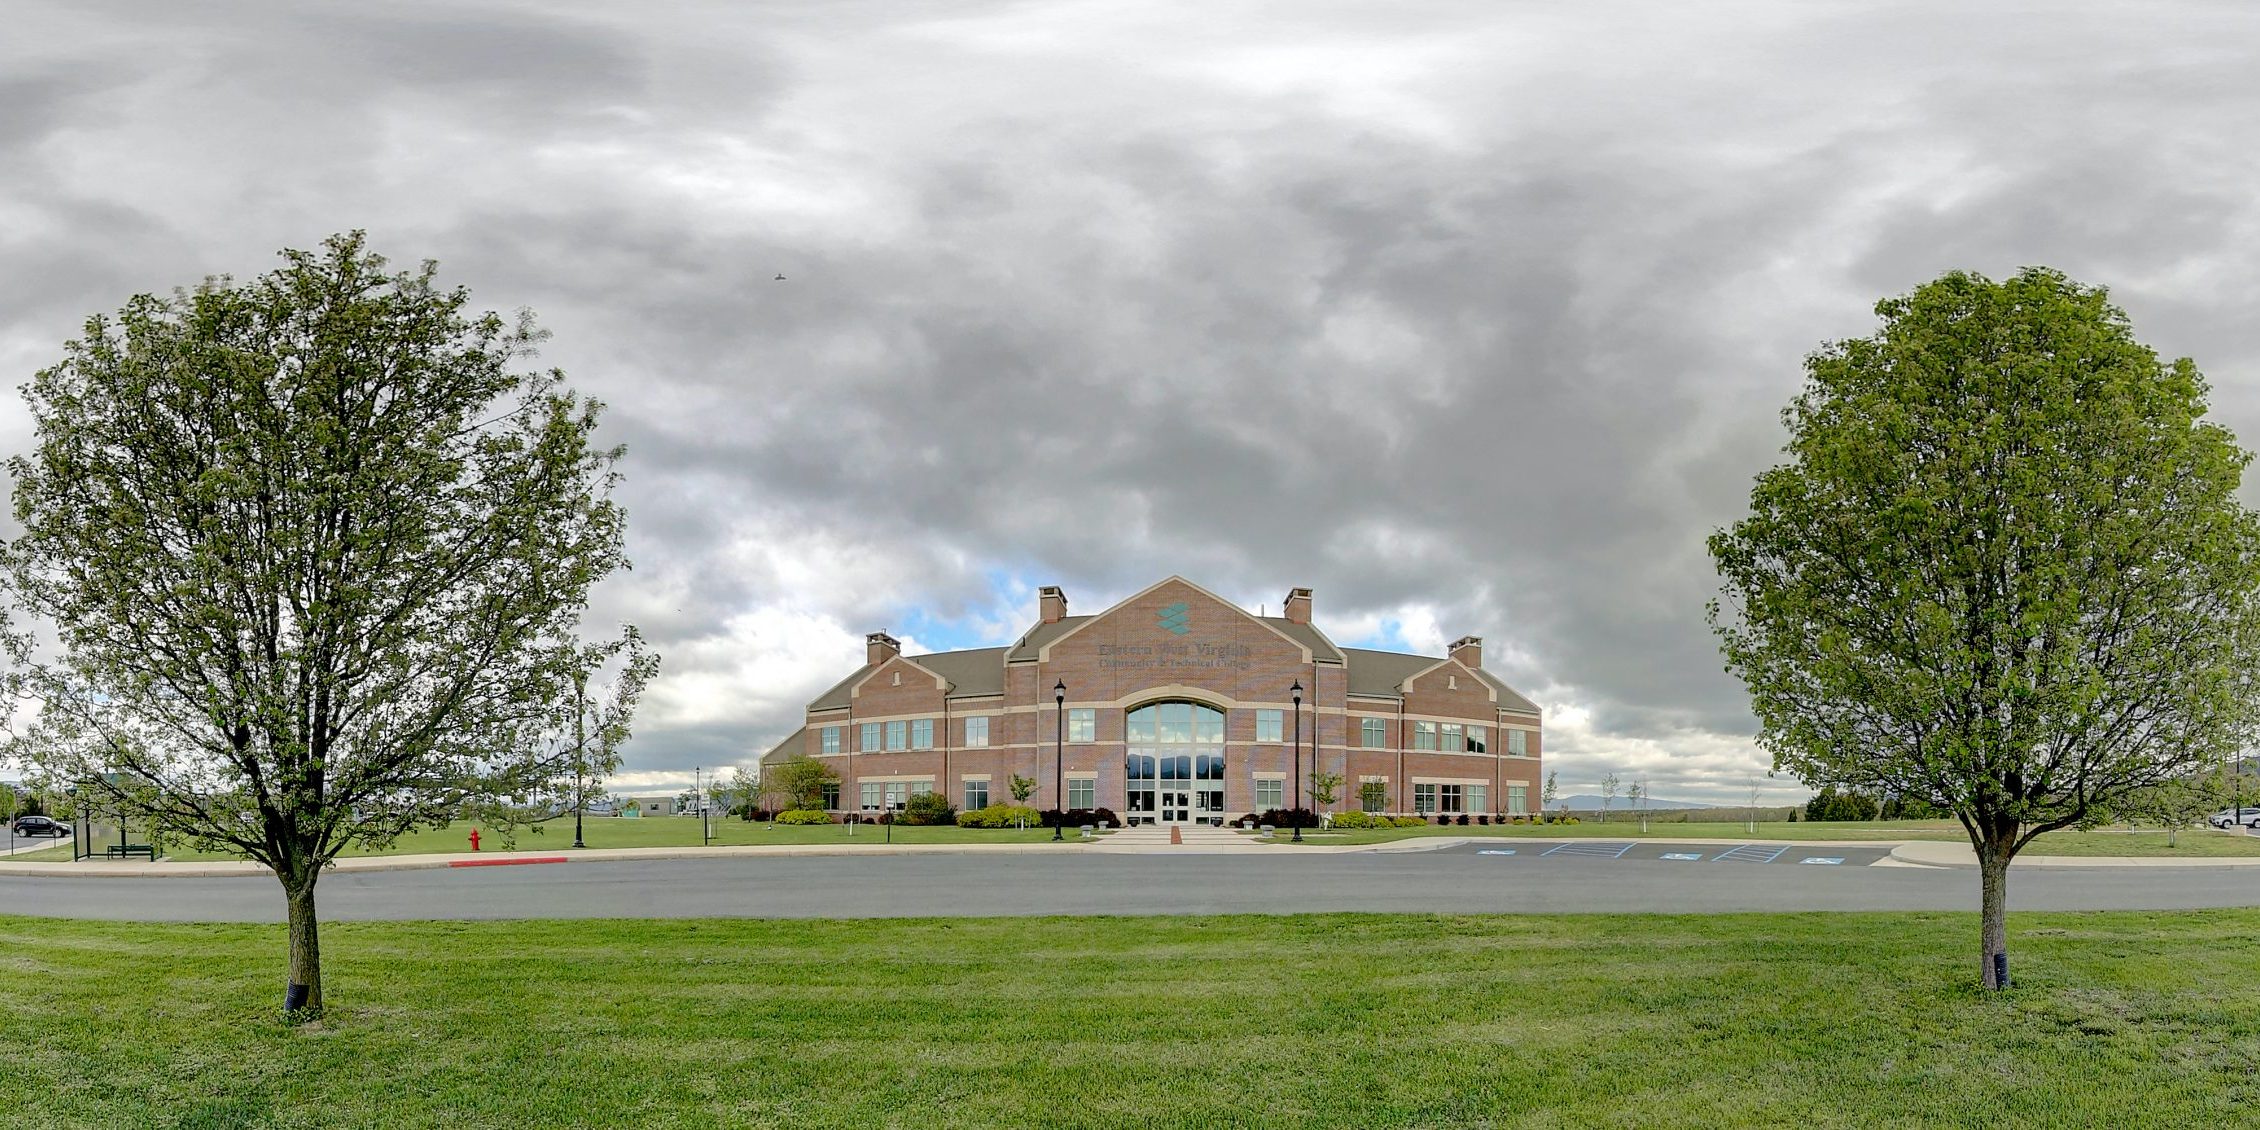 360 image of Eastern's campus building